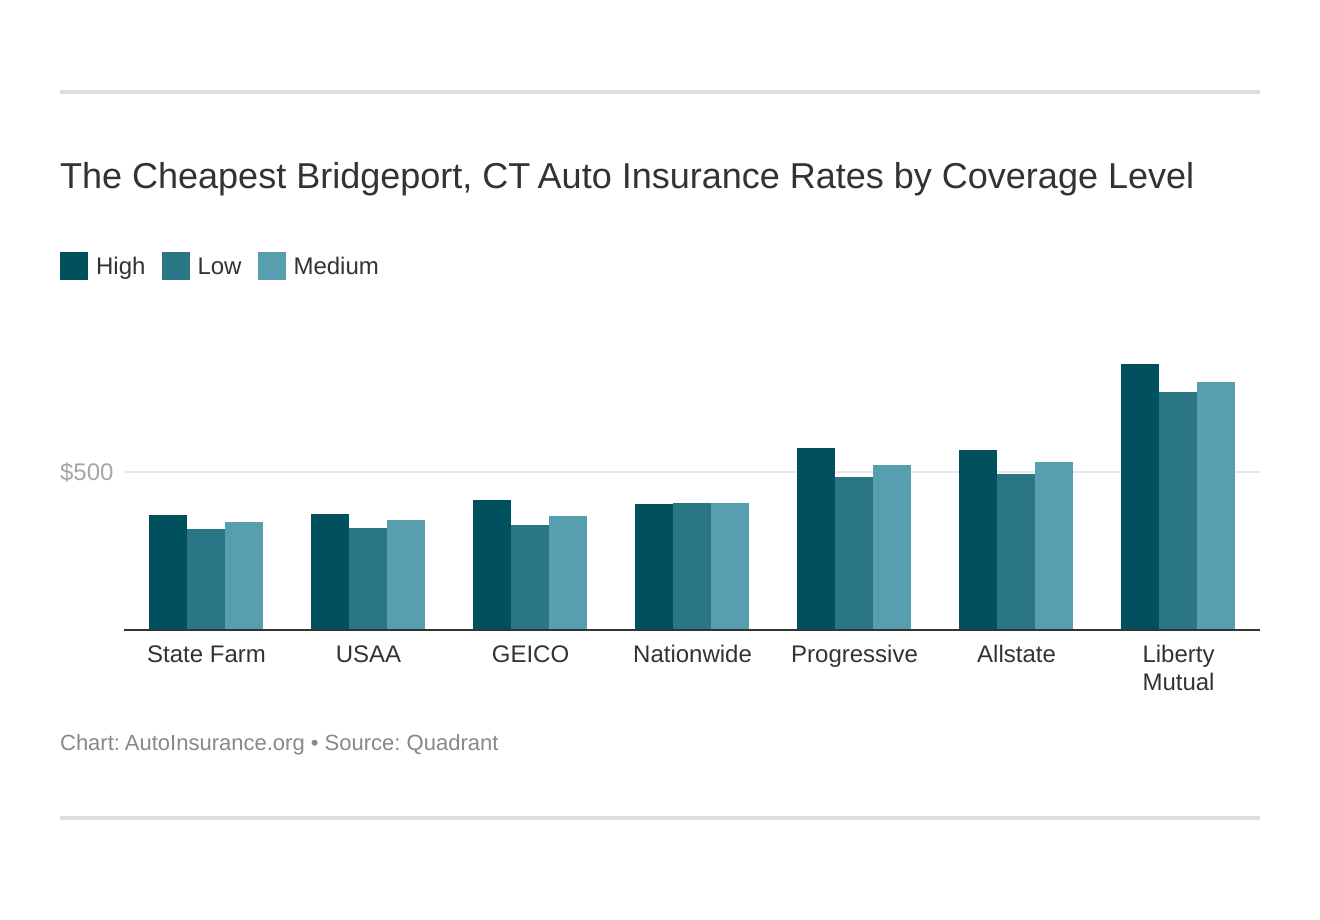 The Cheapest Bridgeport, CT Auto Insurance Rates by Coverage Level